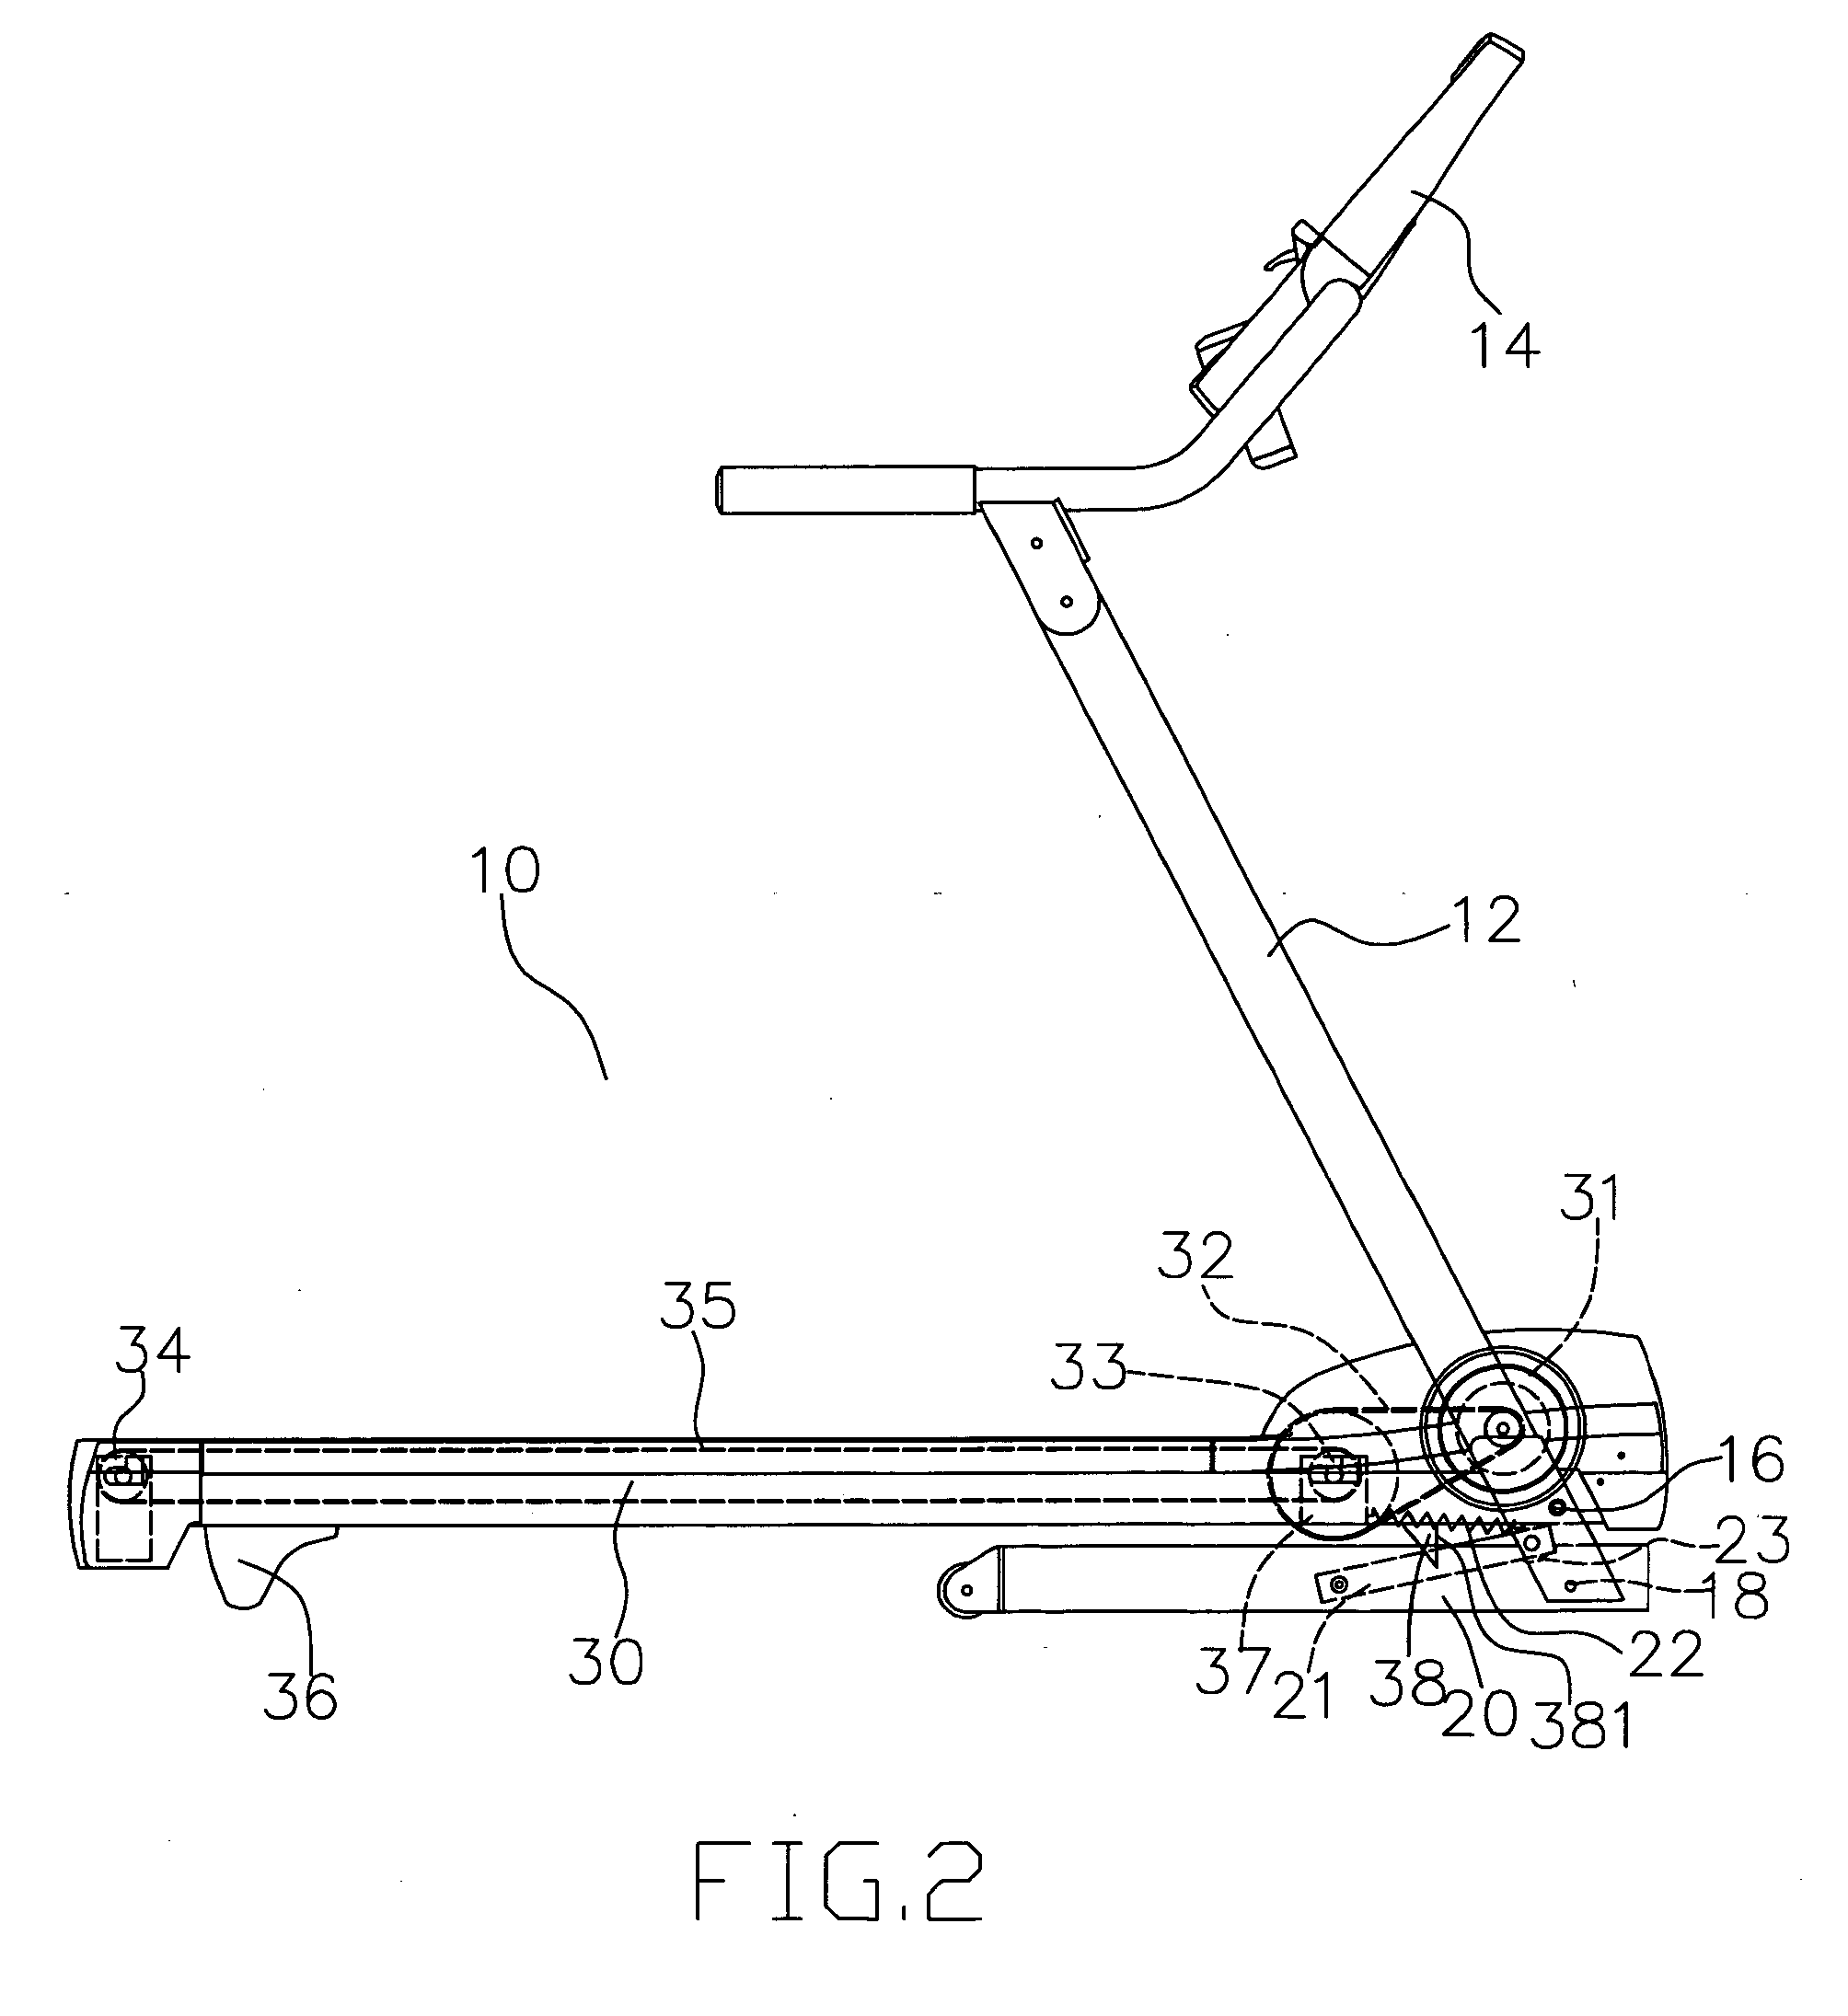 Supporting mechanism for a deck frame of a folding-up treadmill